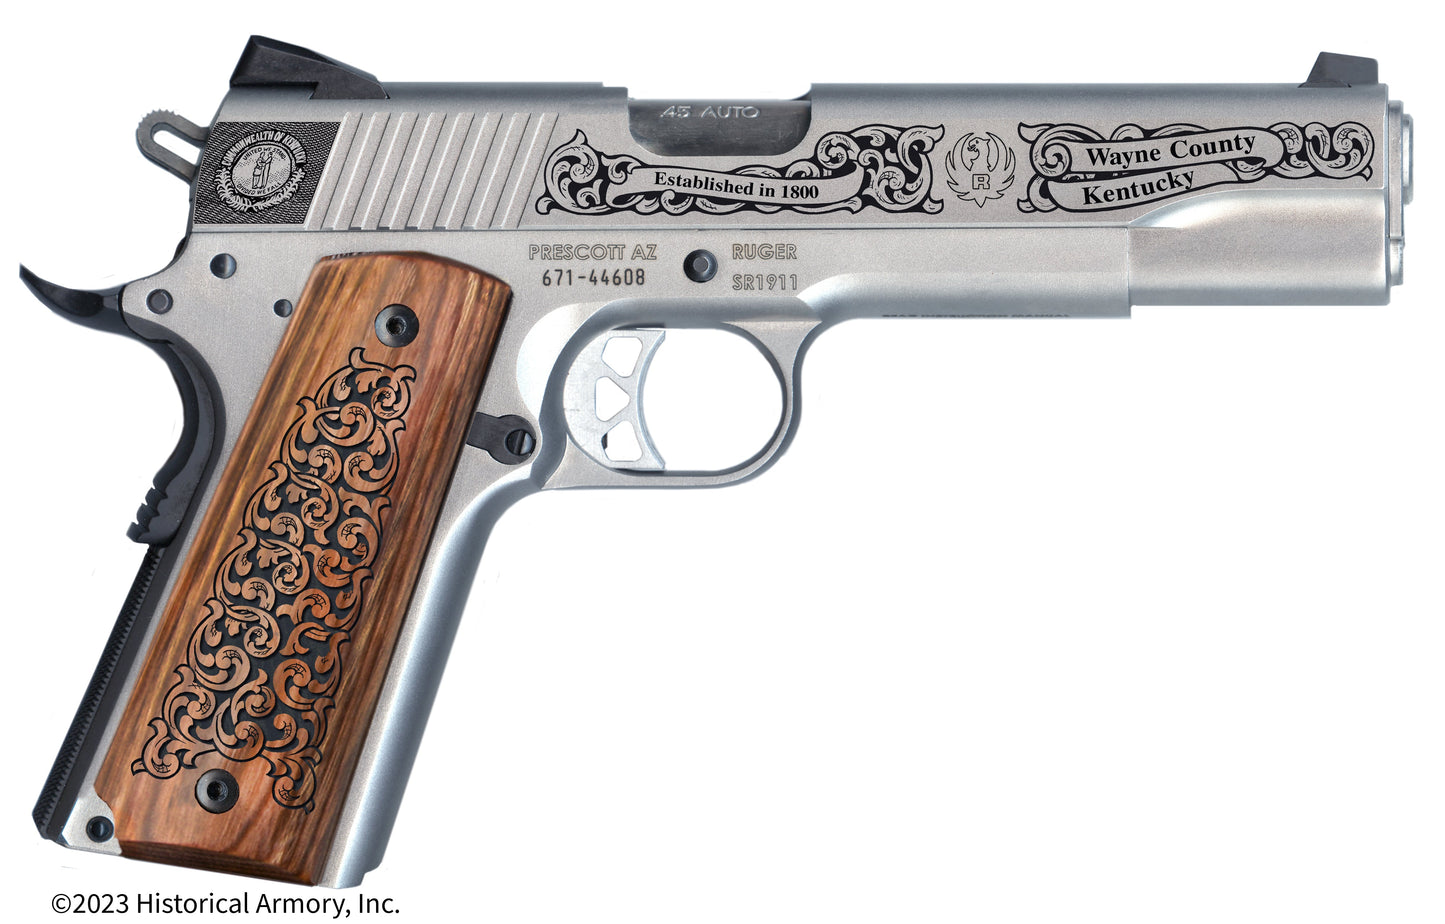 Wayne County Kentucky Engraved .45 Auto Ruger 1911